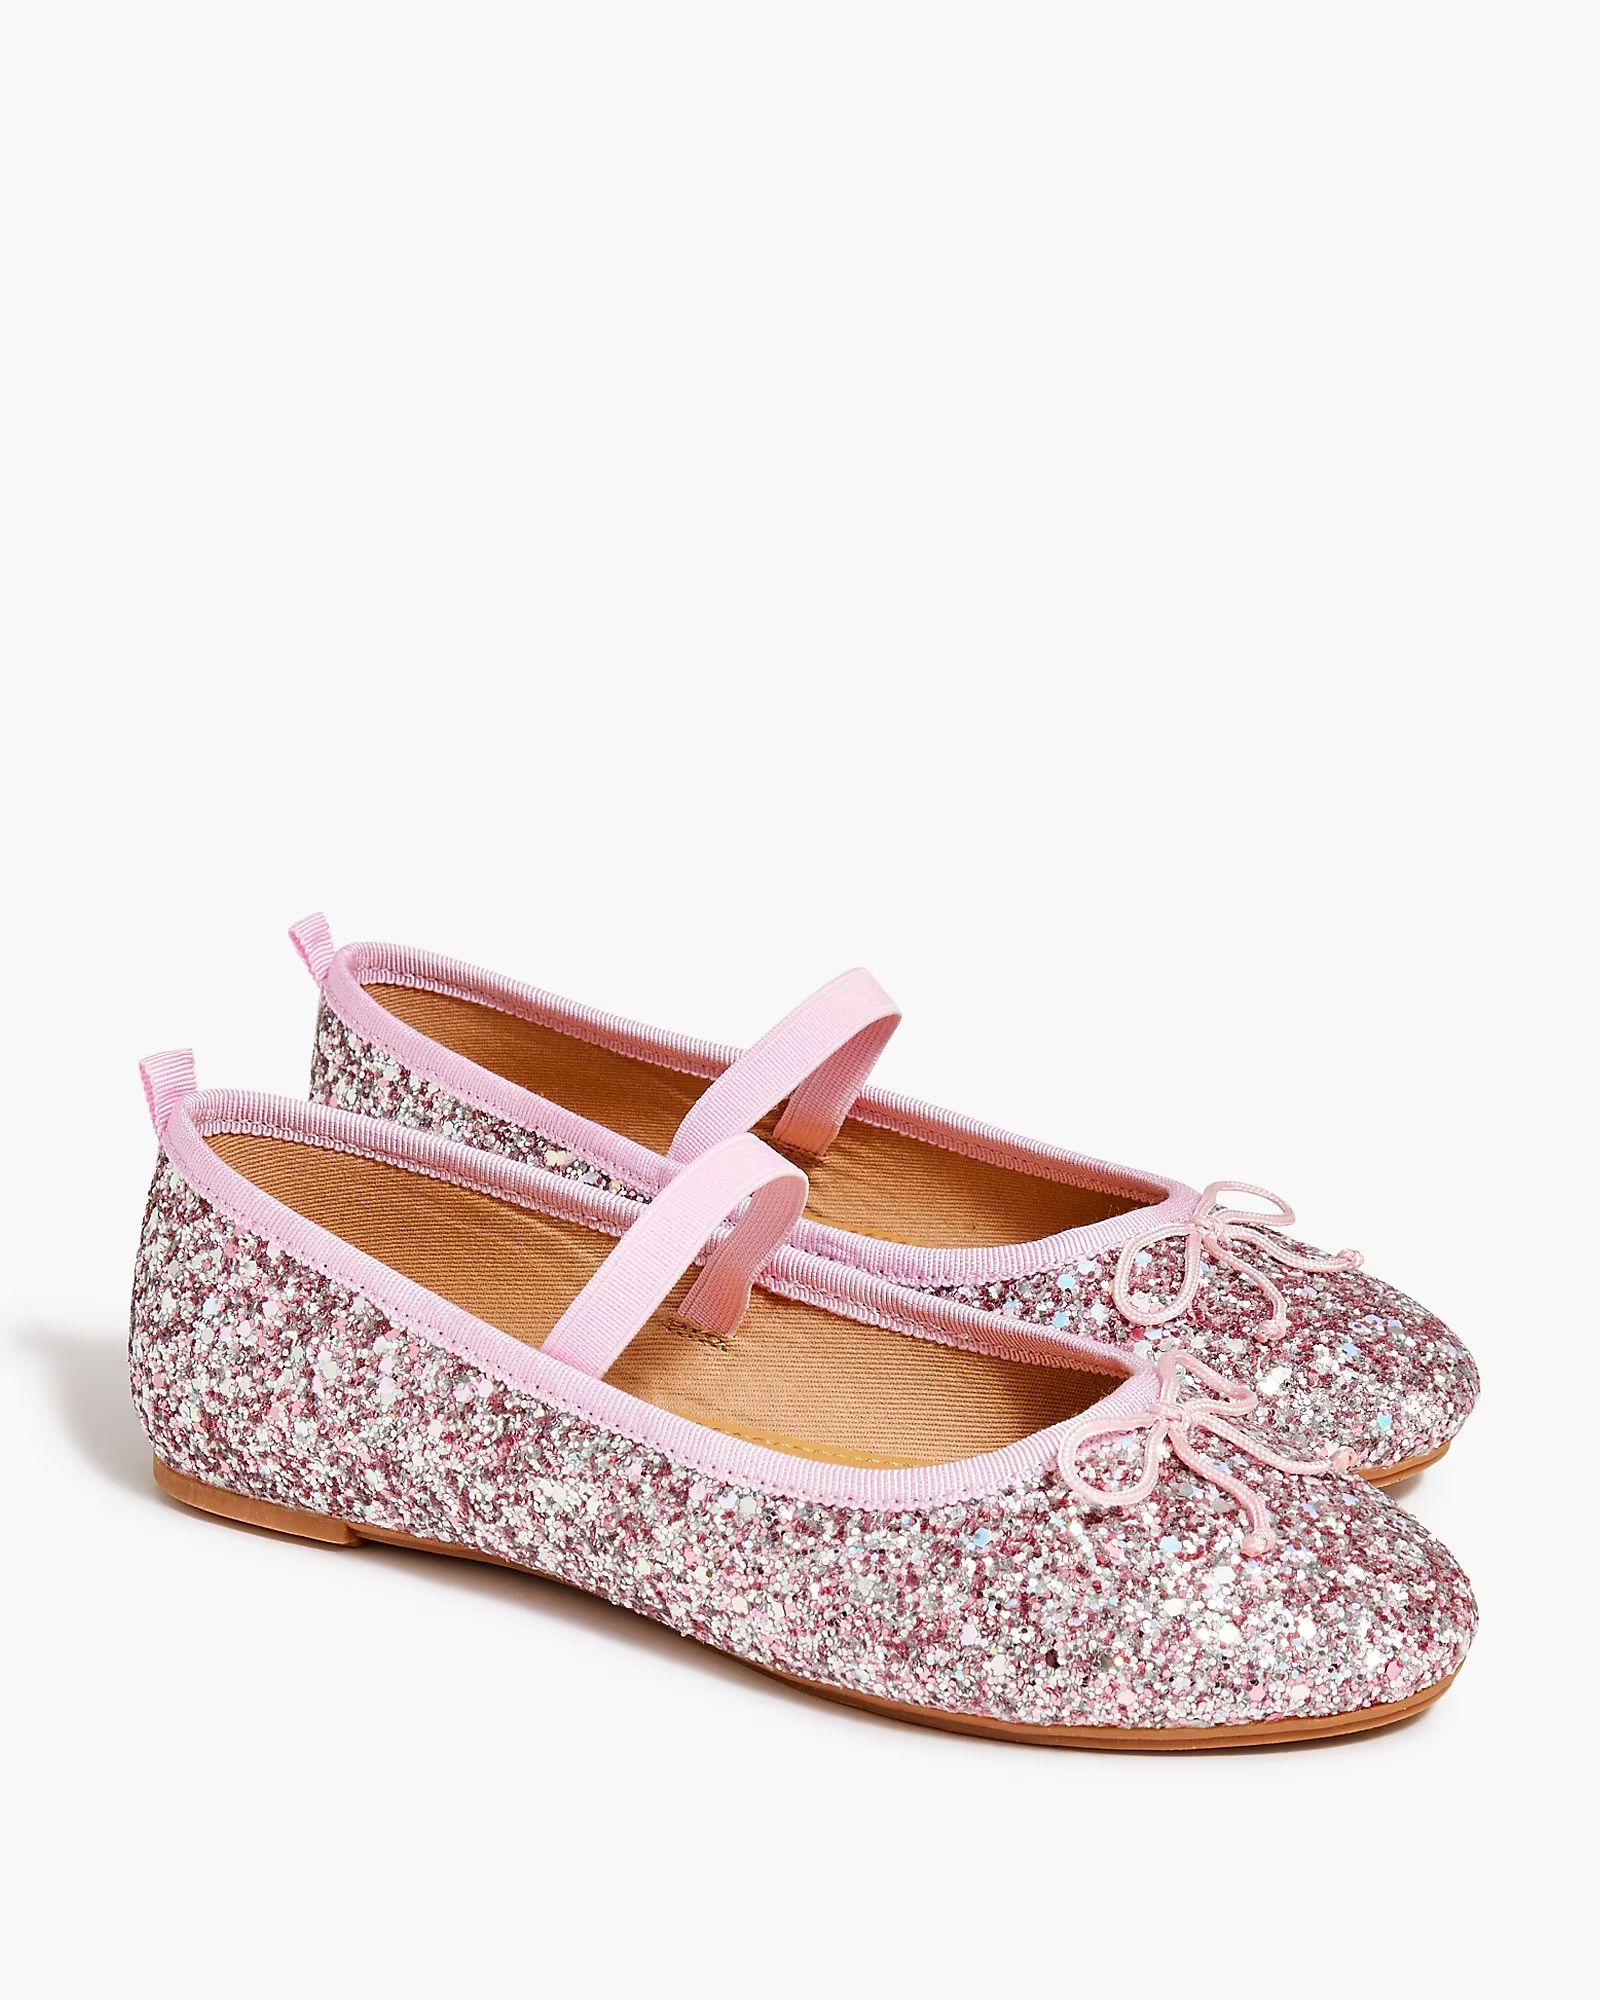 Girls' glitter Mary Janes with elastic strap | J.Crew Factory